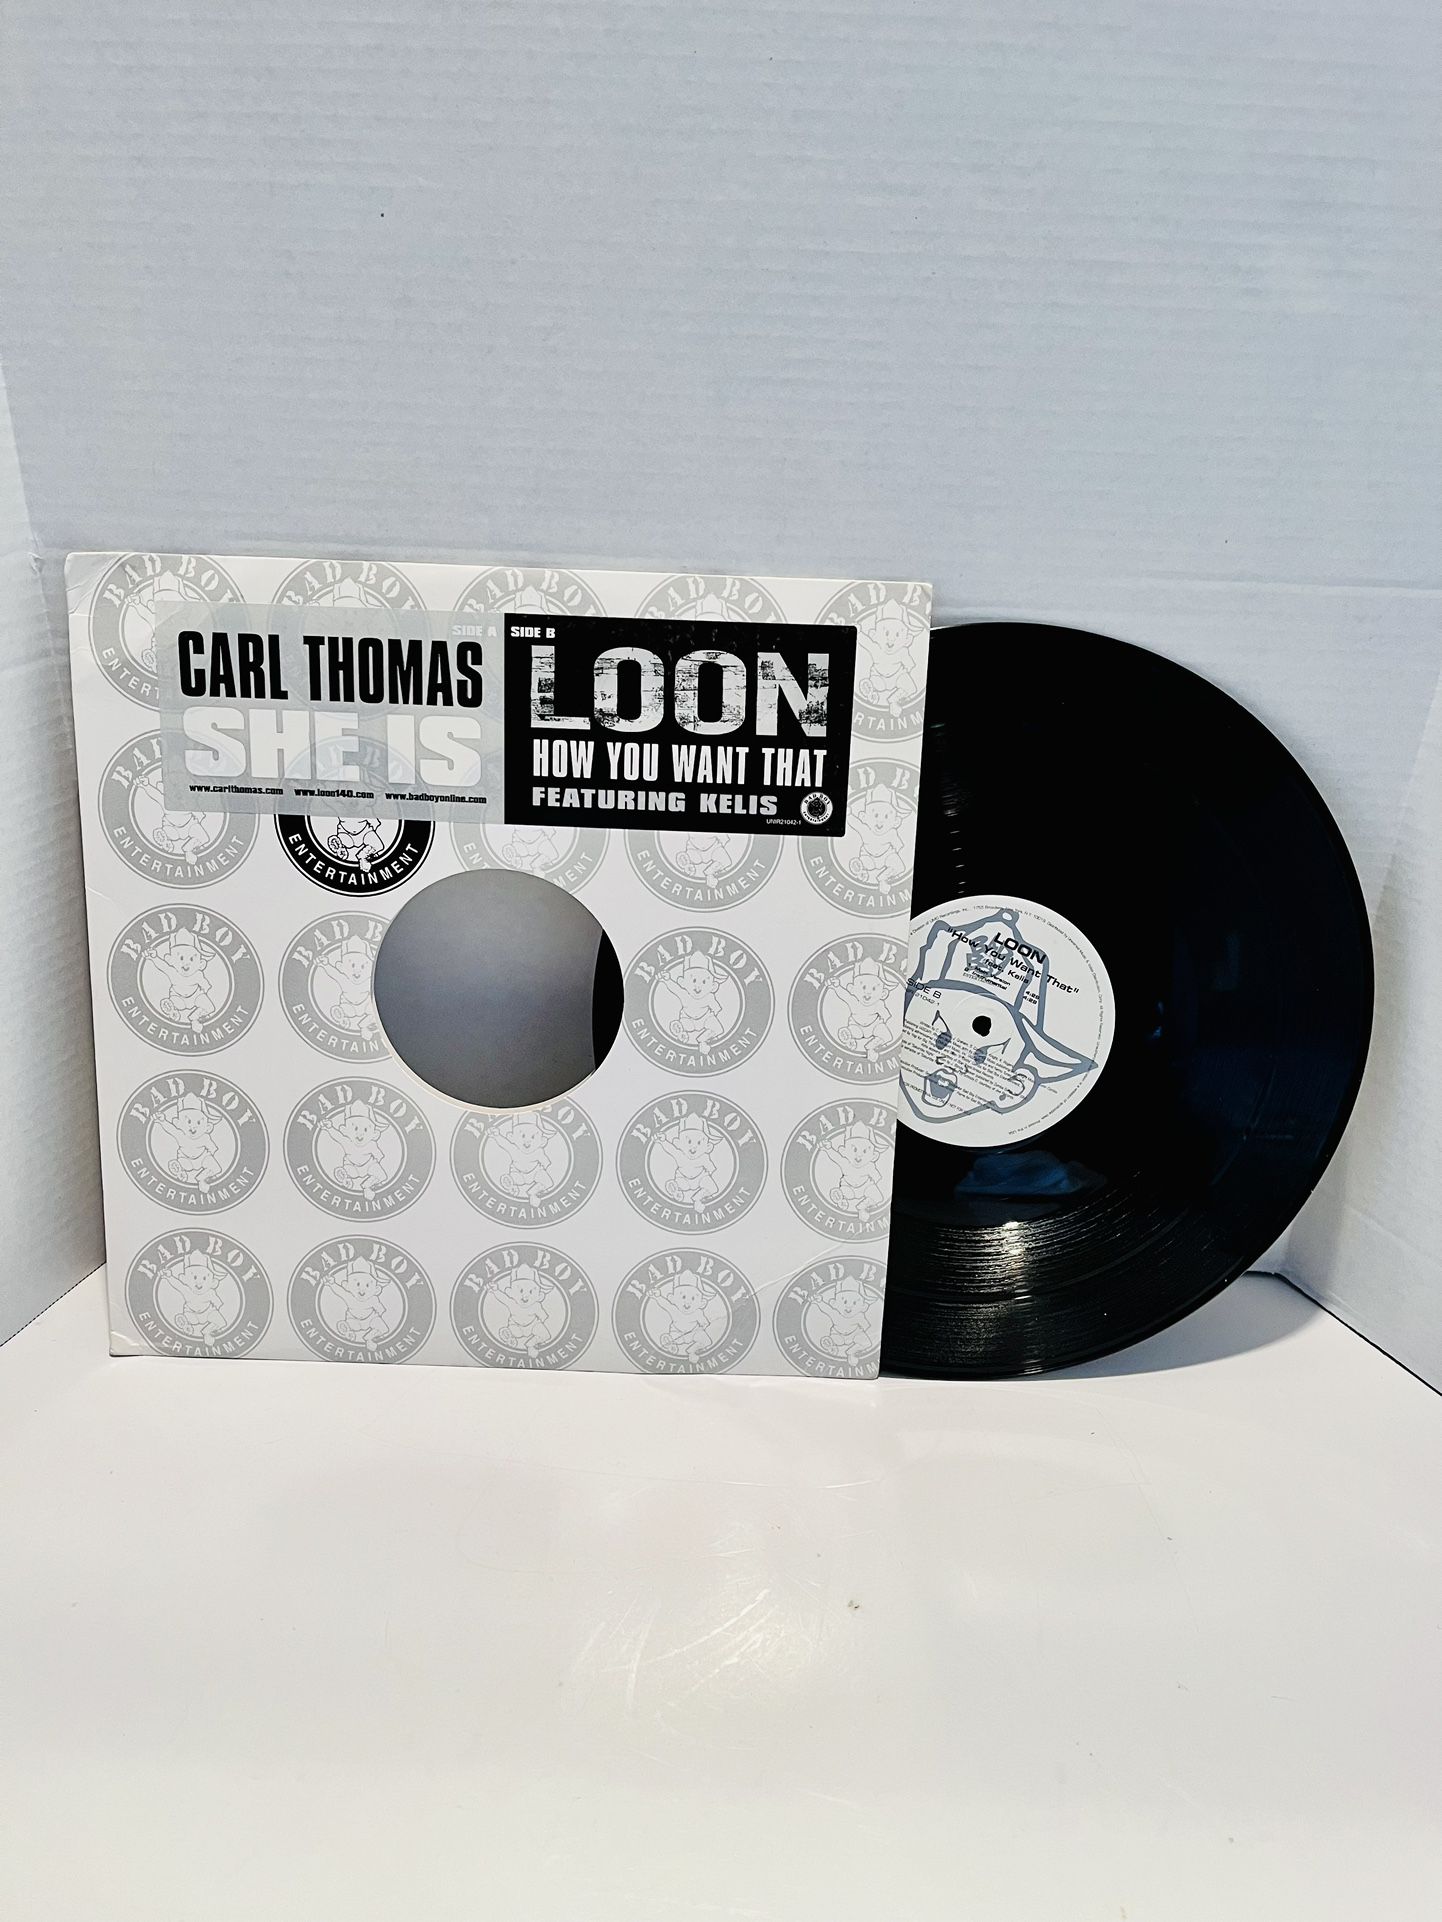 CARL THOMAS SHE IS/LOON HOW YOU WANT THAT  12" VINYL SINGLE Record - NM!!